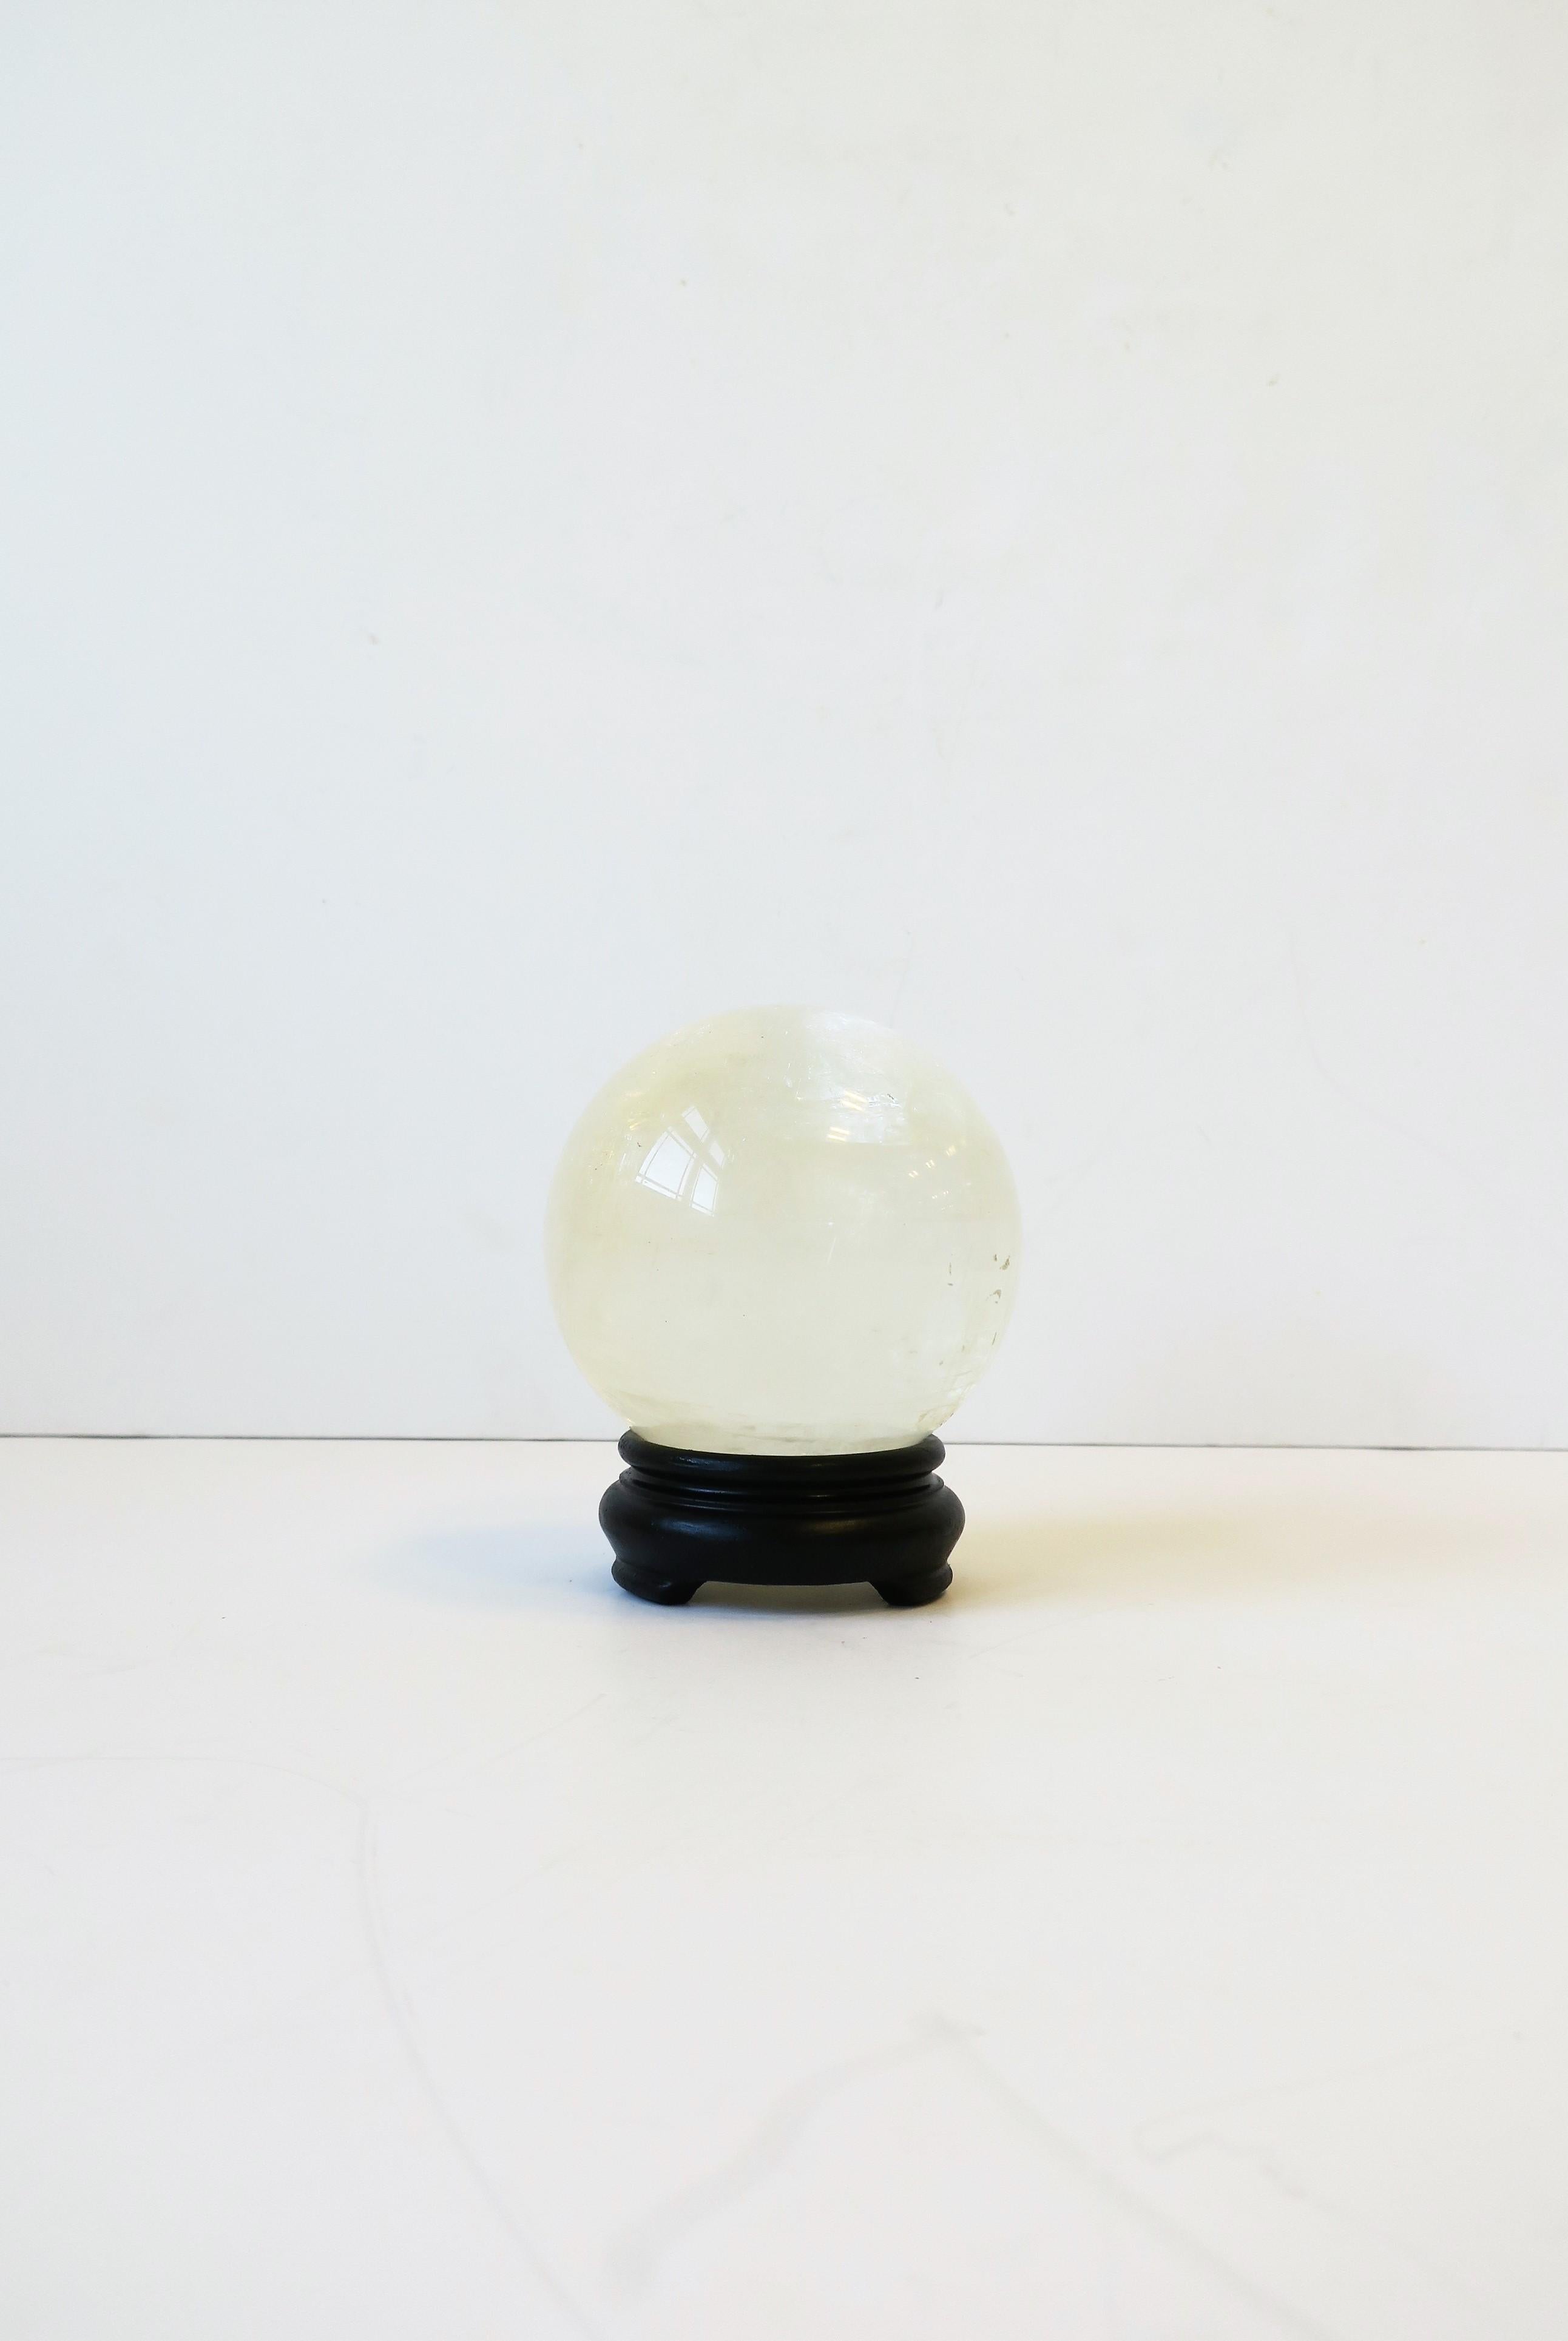 A beautiful and substantial rock crystal decorative sphere on a black wood base 

Piece measures: 4